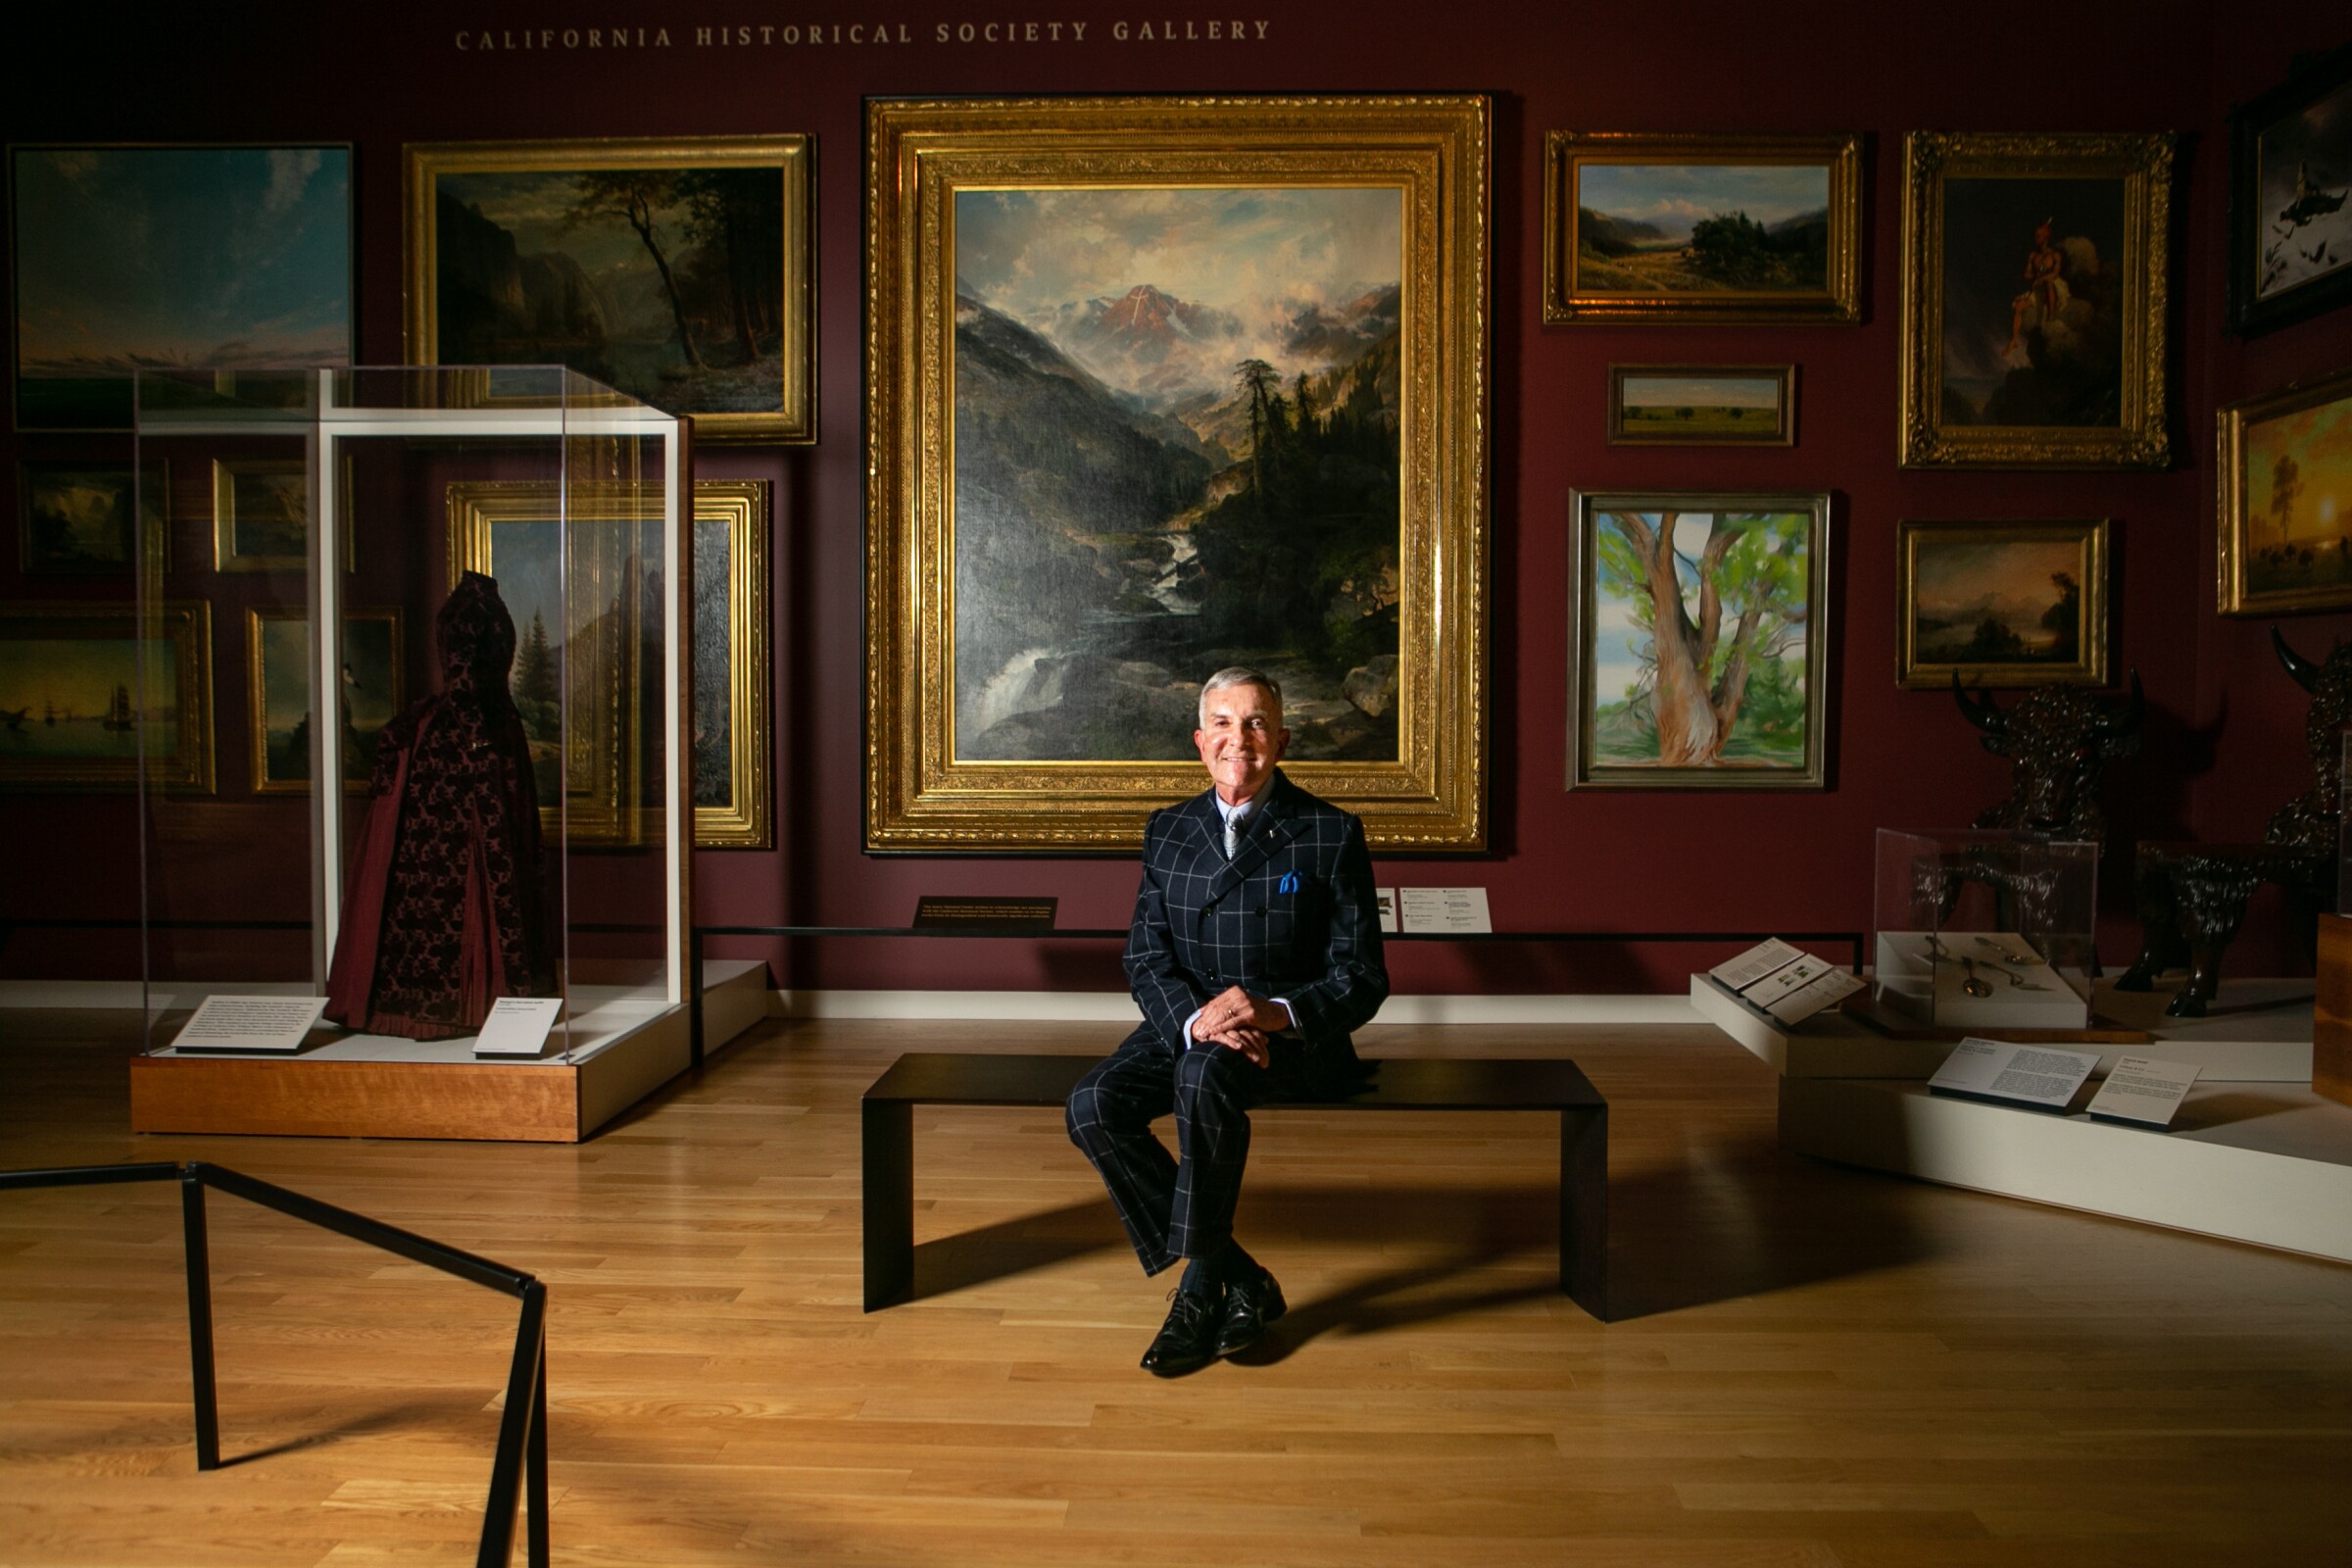 Rick West, in a black and blue checked suit, sits before landscapes in a dramatically illuminated gallery